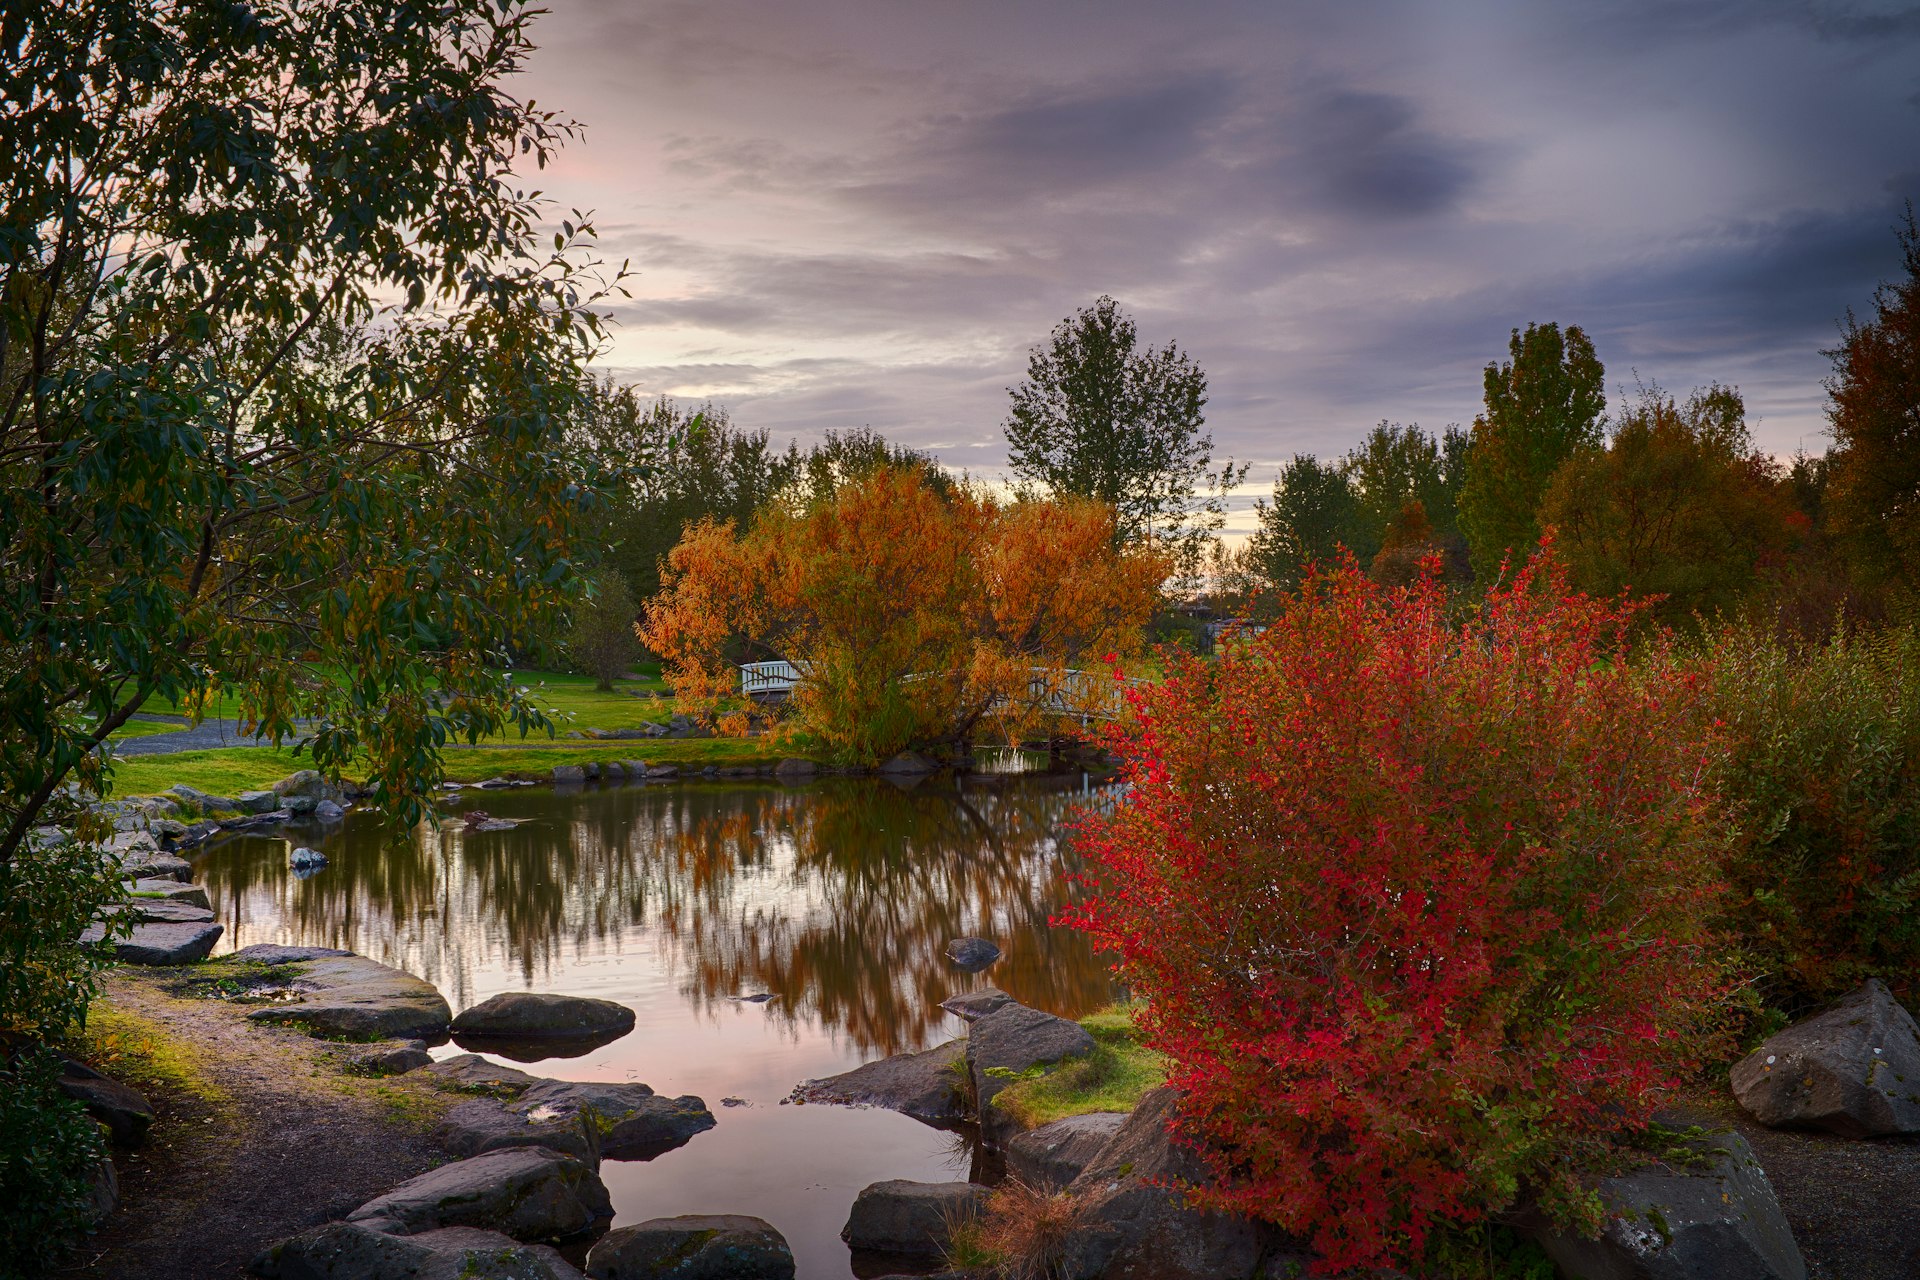 An autumnal shot of the botanical gardens in Laugardalur, featuring a glassy pond and color-changing trees